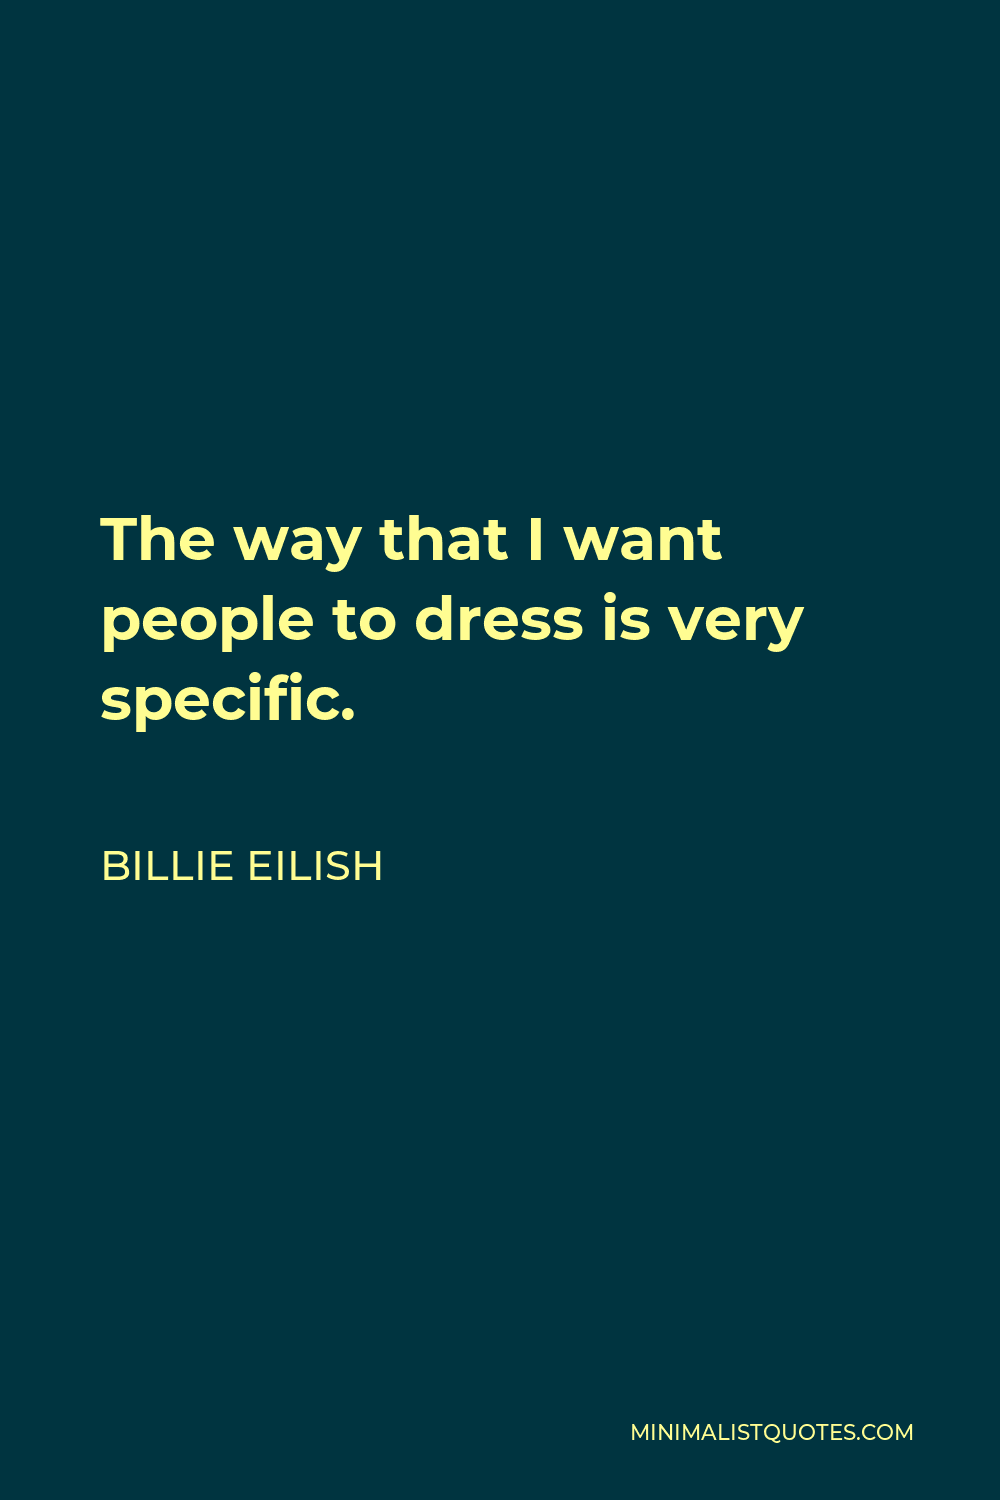 Billie Eilish Quote - The way that I want people to dress is very specific.